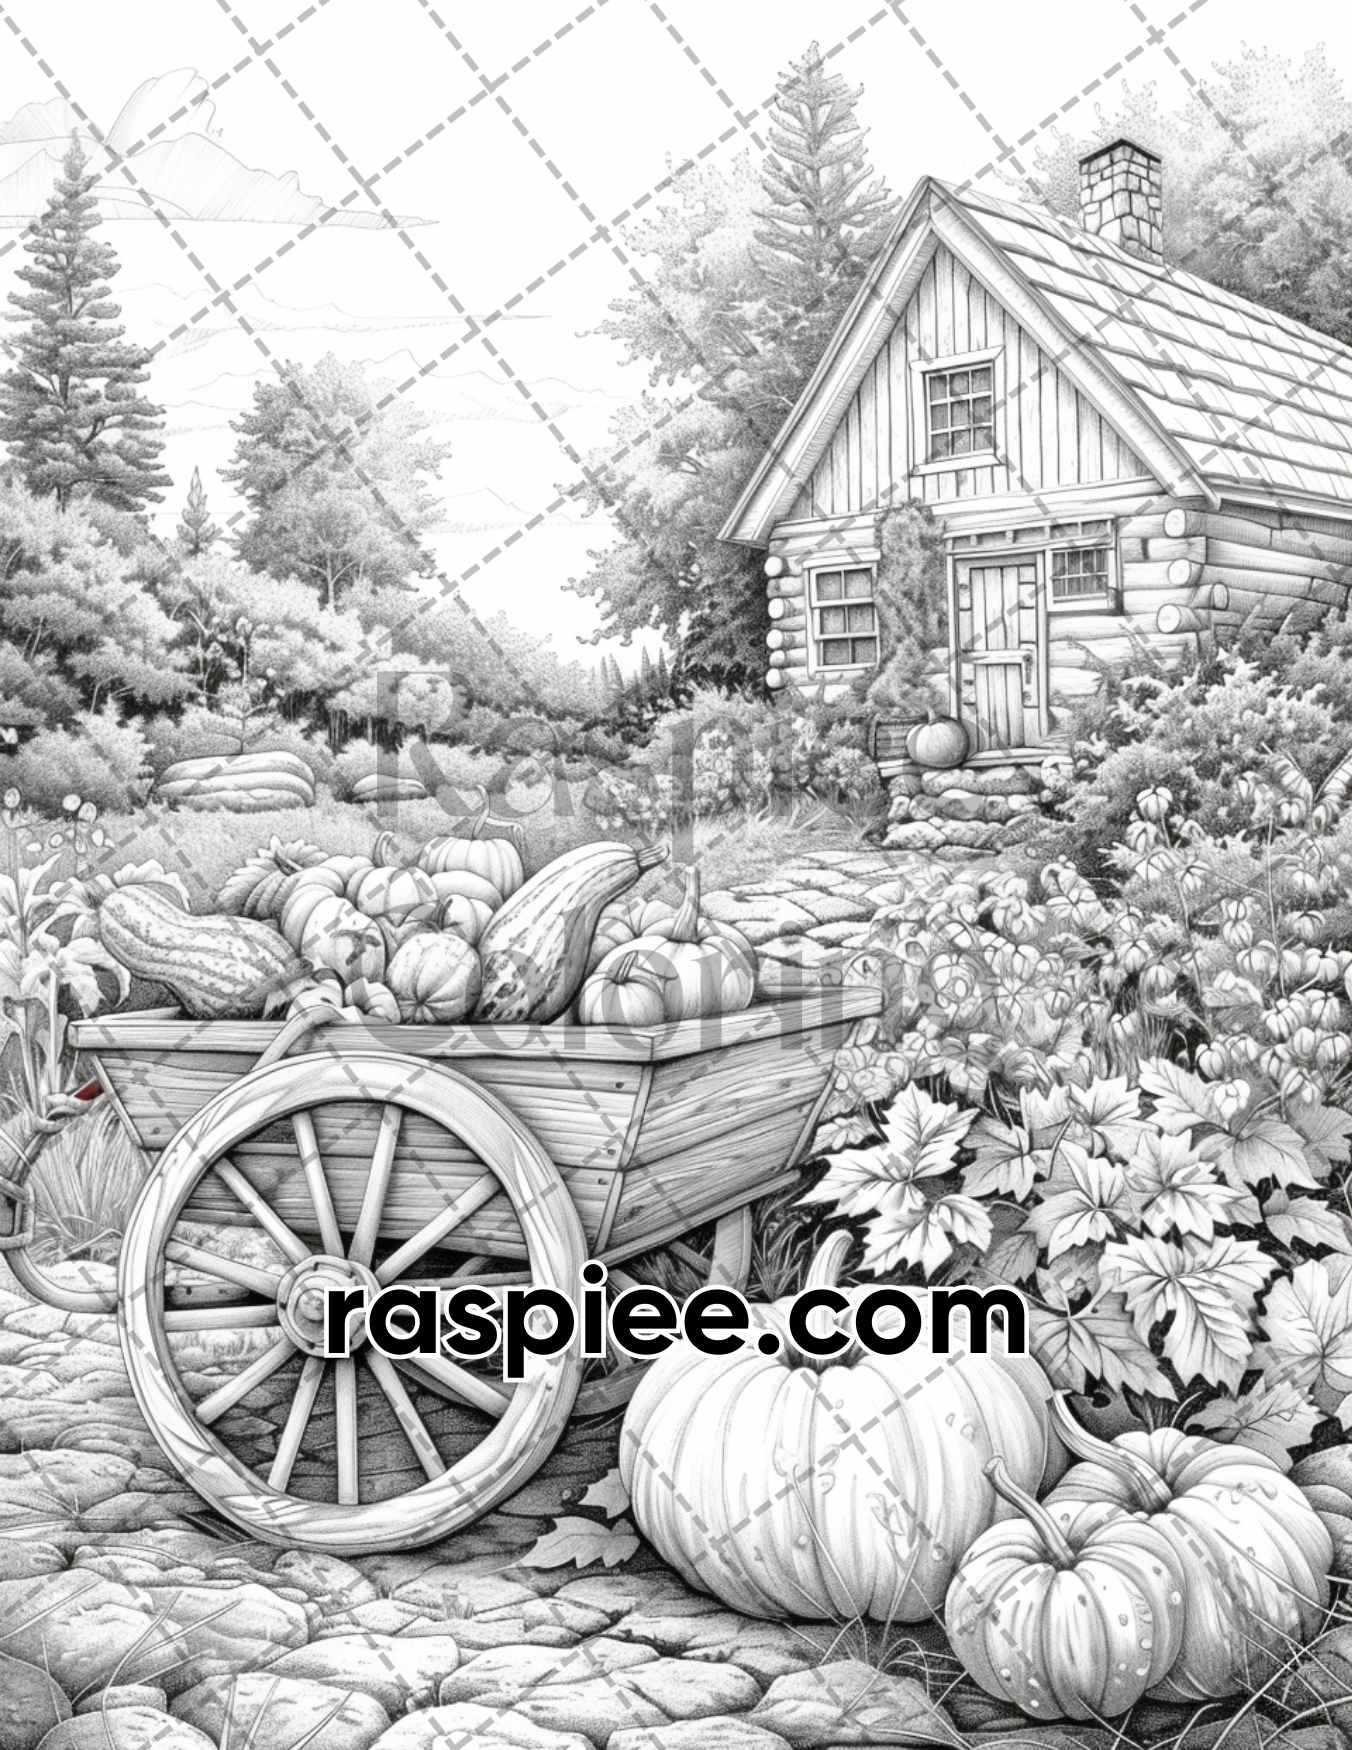 adult coloring pages, adult coloring sheets, adult coloring book pdf, adult coloring book printable, grayscale coloring pages, grayscale coloring books, grayscale illustration, Gorgeous Cottage Garden Grayscale Adult Coloring Pages